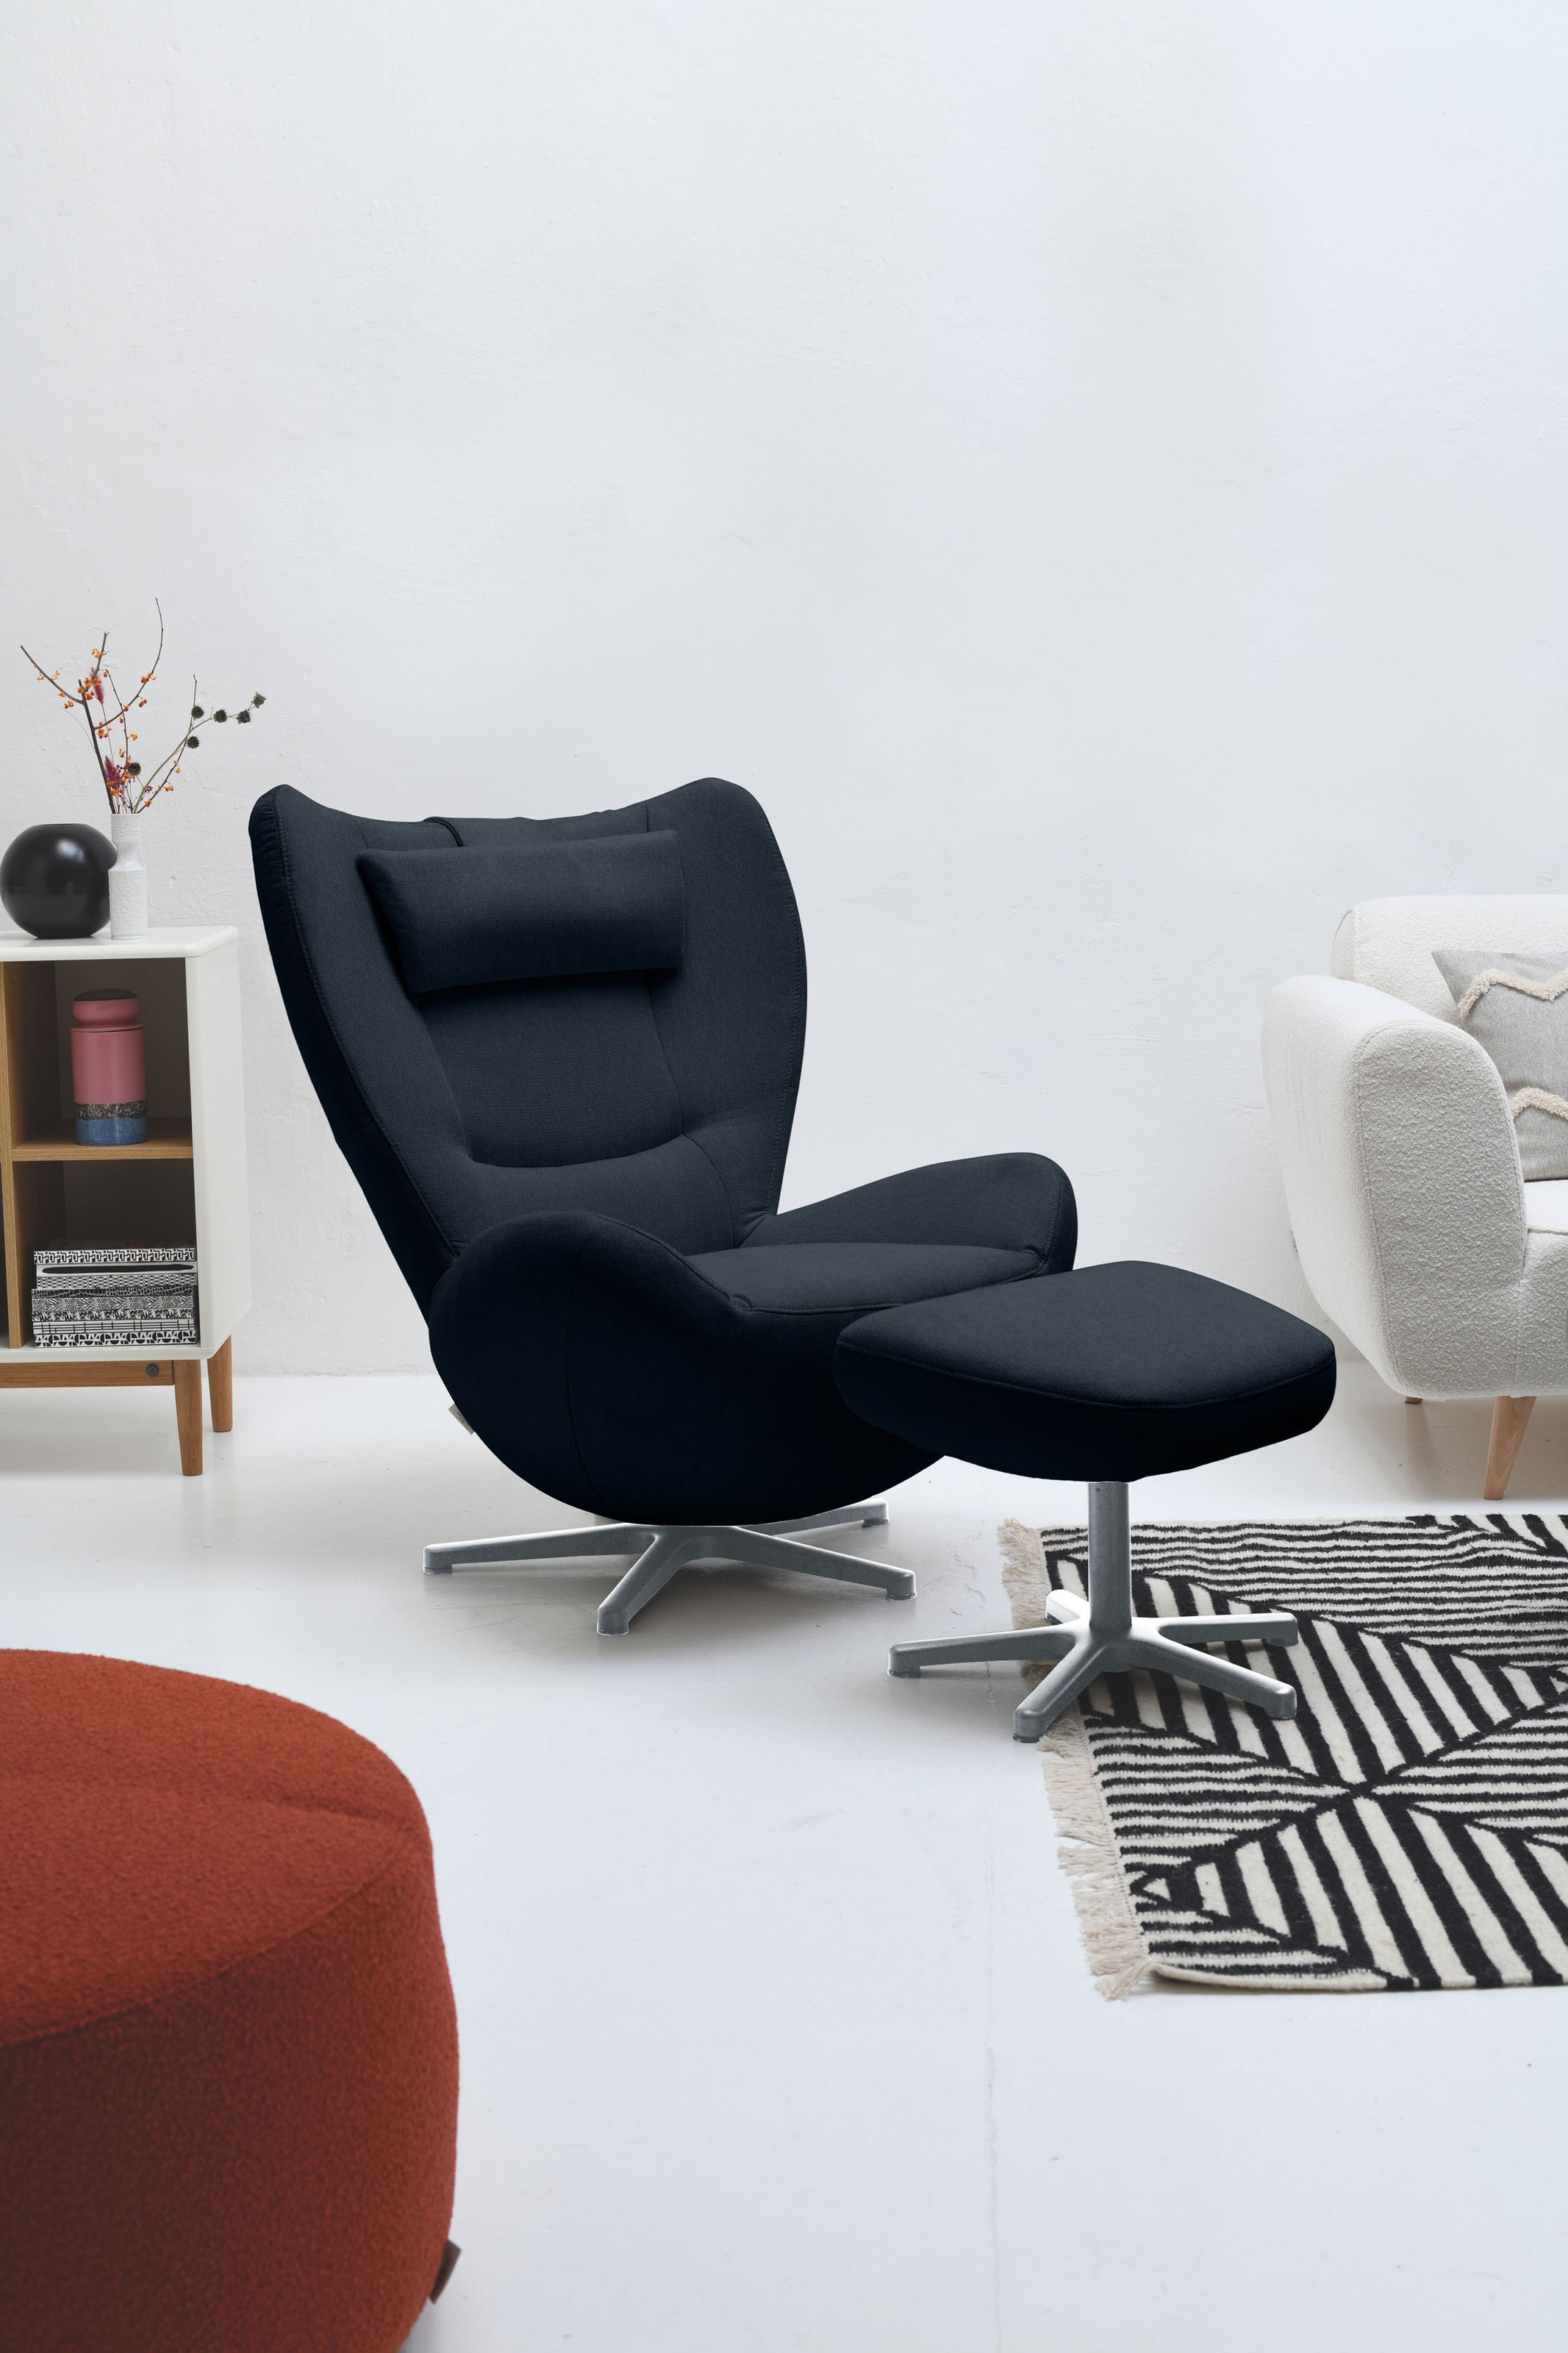 Shop PURE«, TAILOR HOME Metall-Drehfuß Chrom mit Online »TOM TOM OTTO in Loungesessel